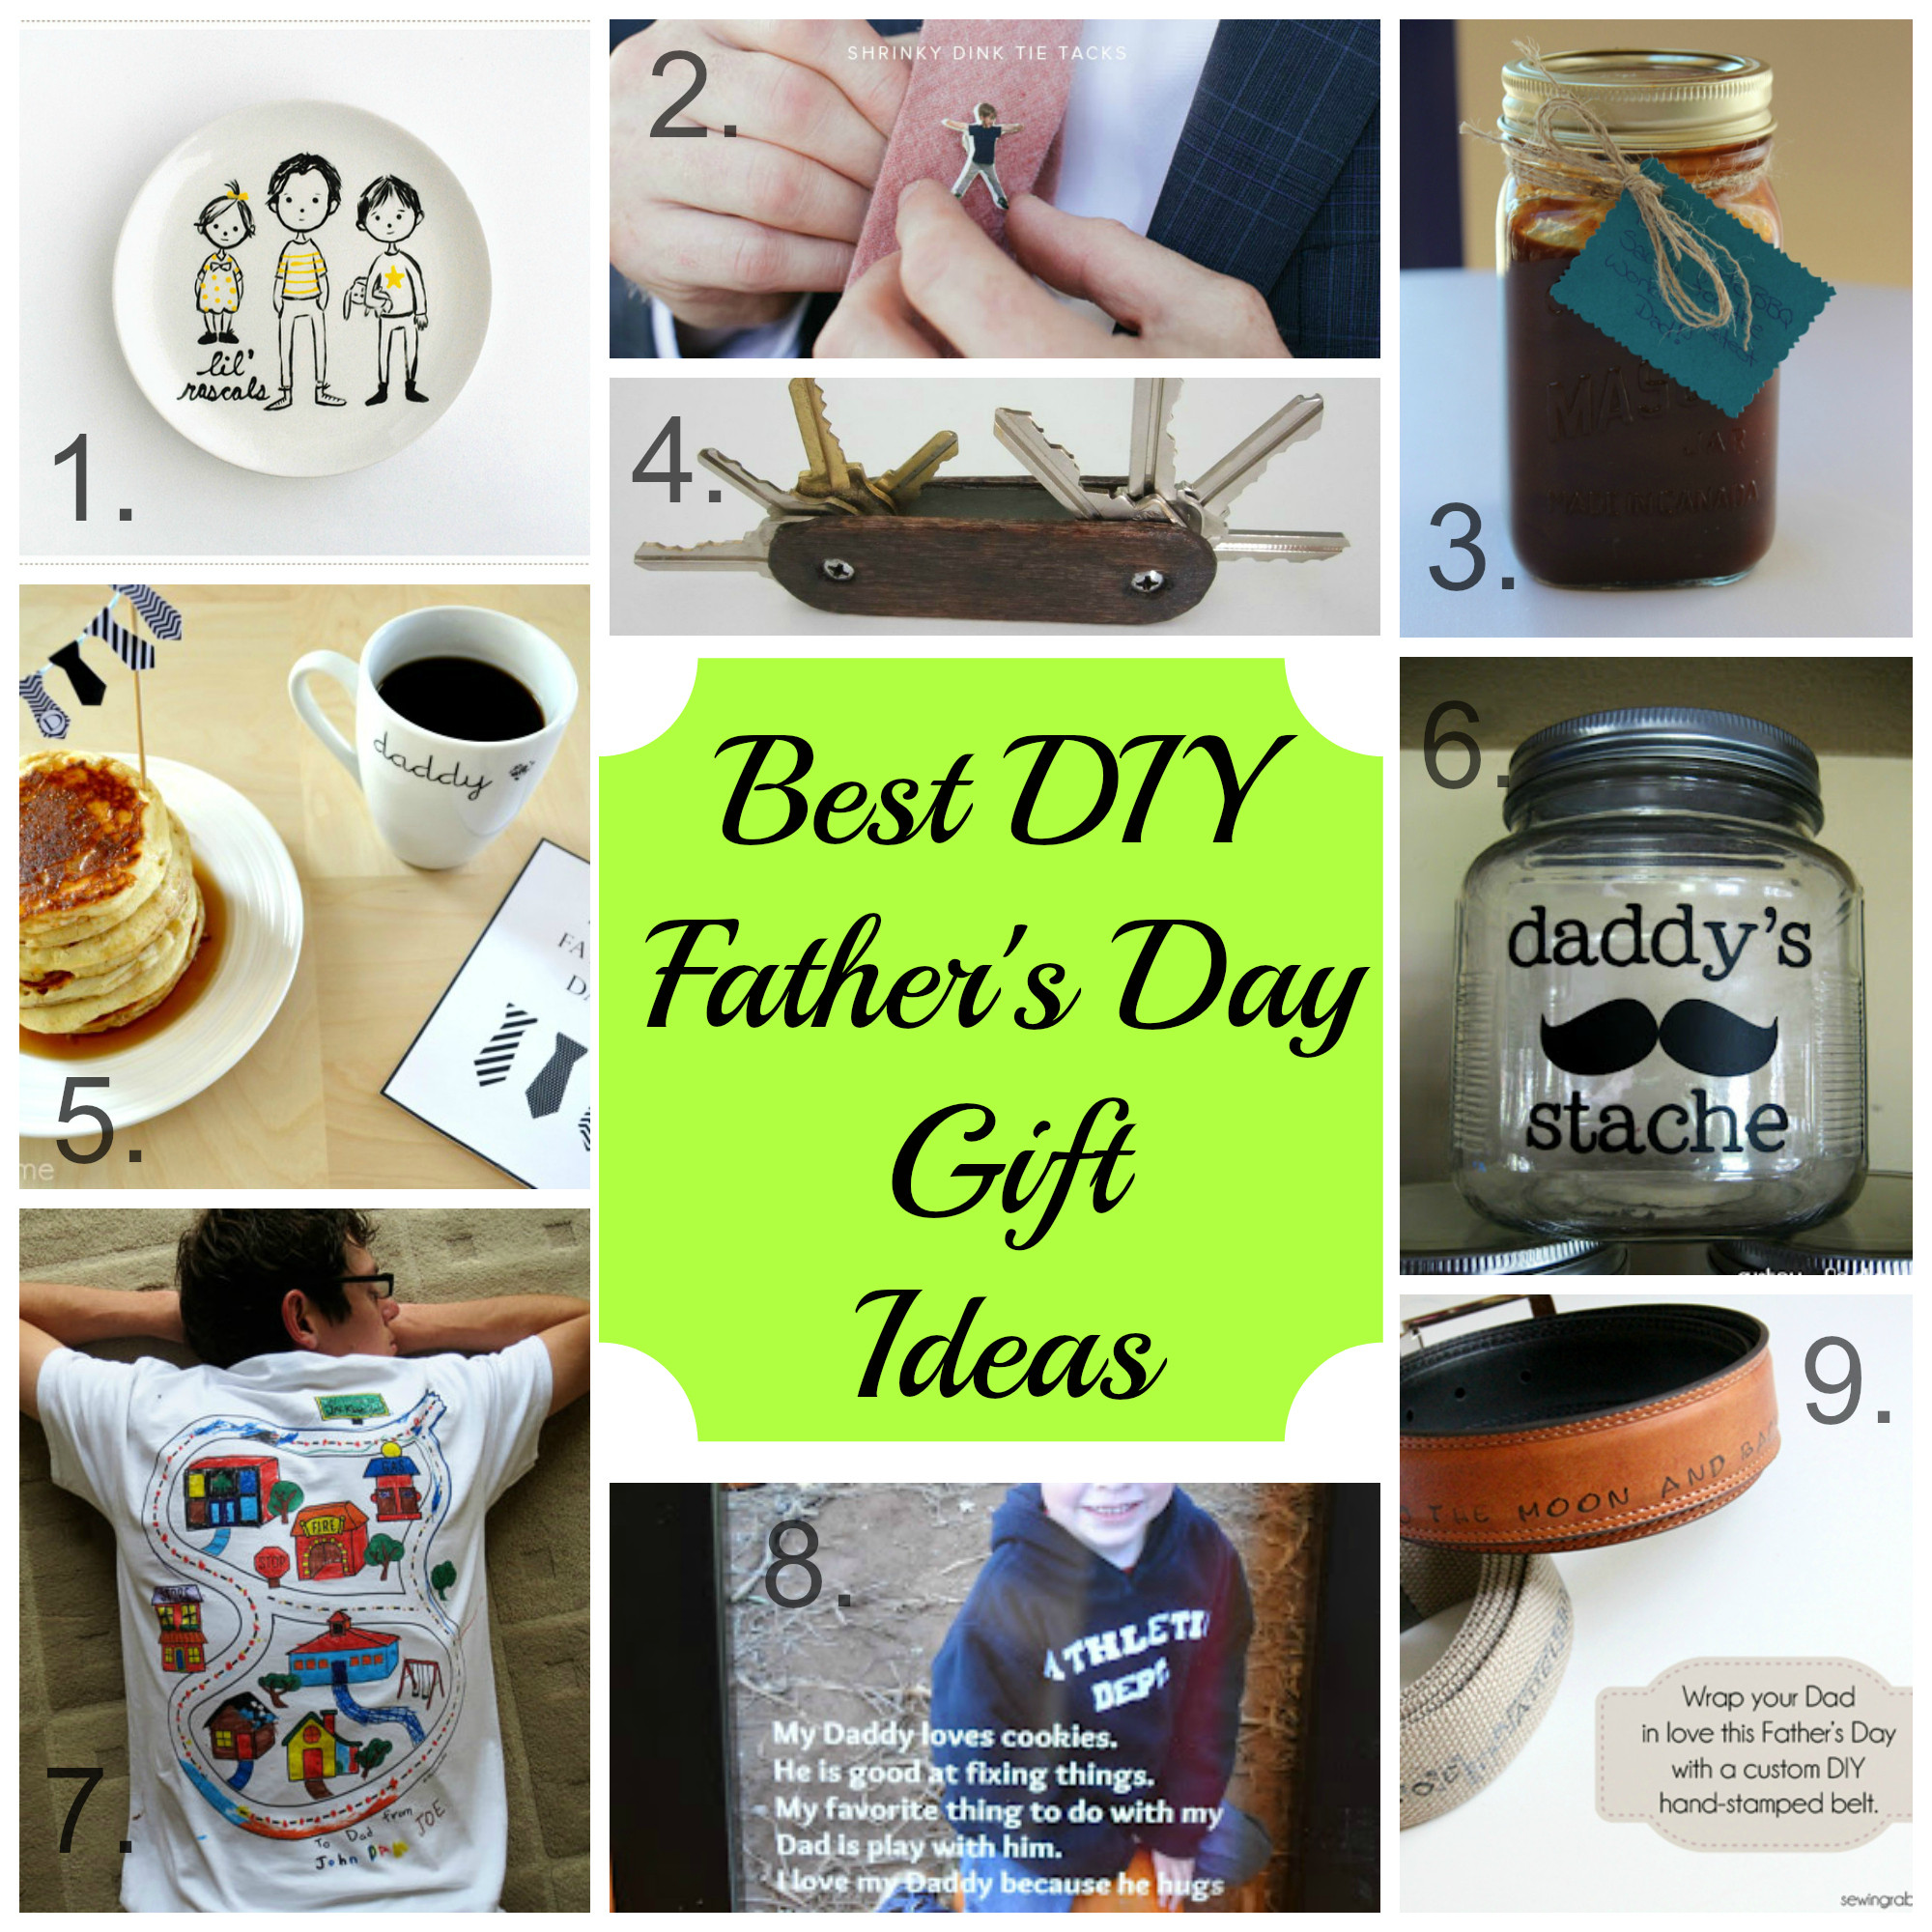 What Are Some Good Fathers Day Gifts
 Best DIY Father’s Day Gift Ideas – Adventures of an